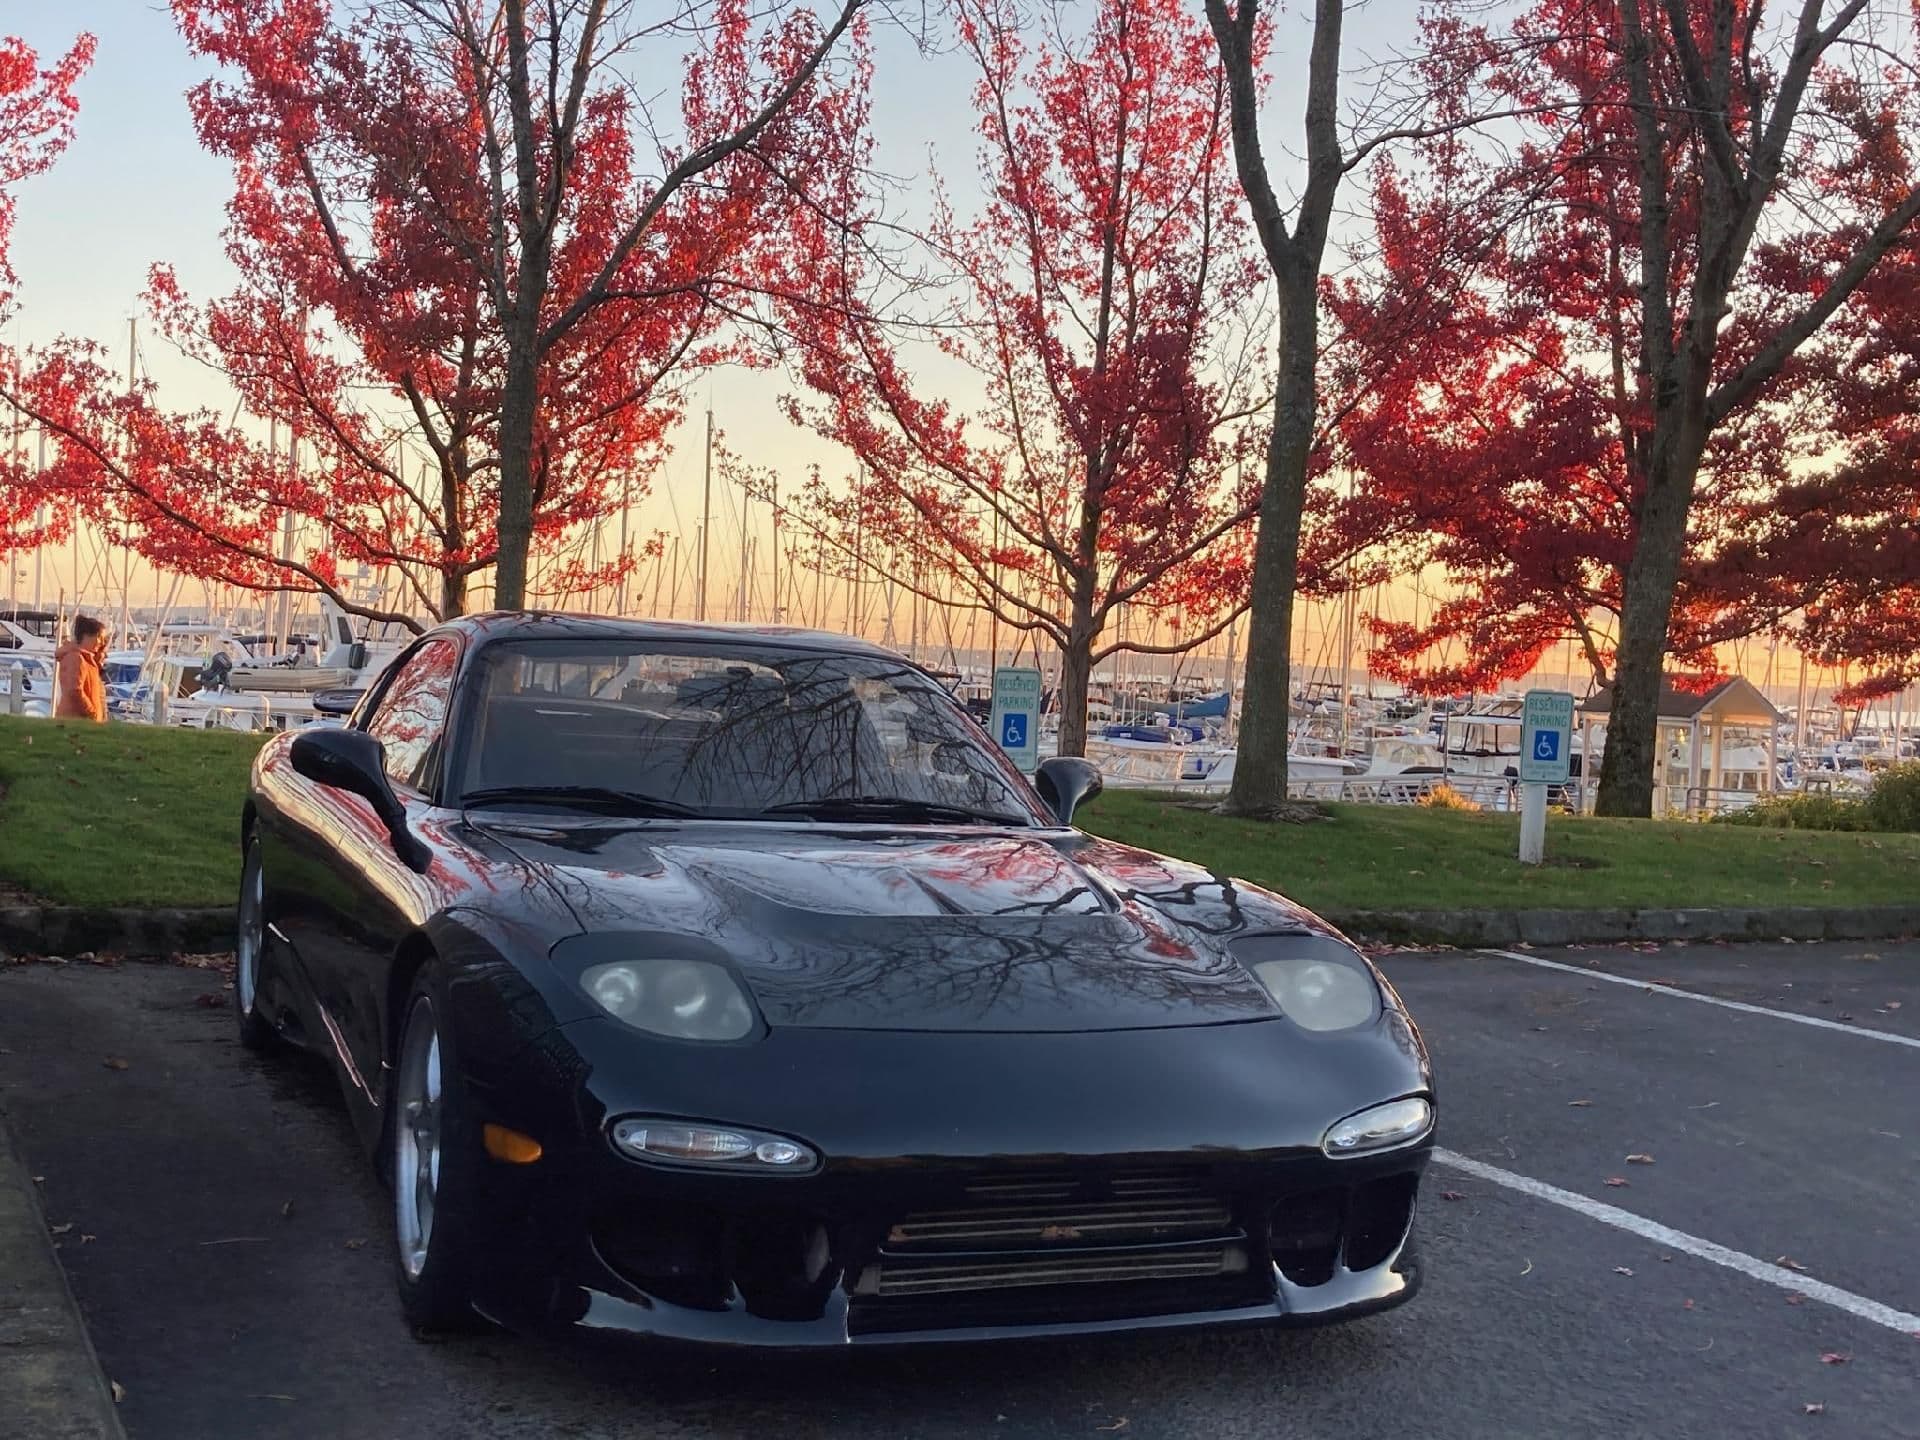 1993 Mazda RX-7 - Ready to sell my Single turbo FD - Used - VIN JM1FD3310P0208359 - 145,000 Miles - 2 cyl - 2WD - Manual - Coupe - Black - Seattle, WA 98199, United States